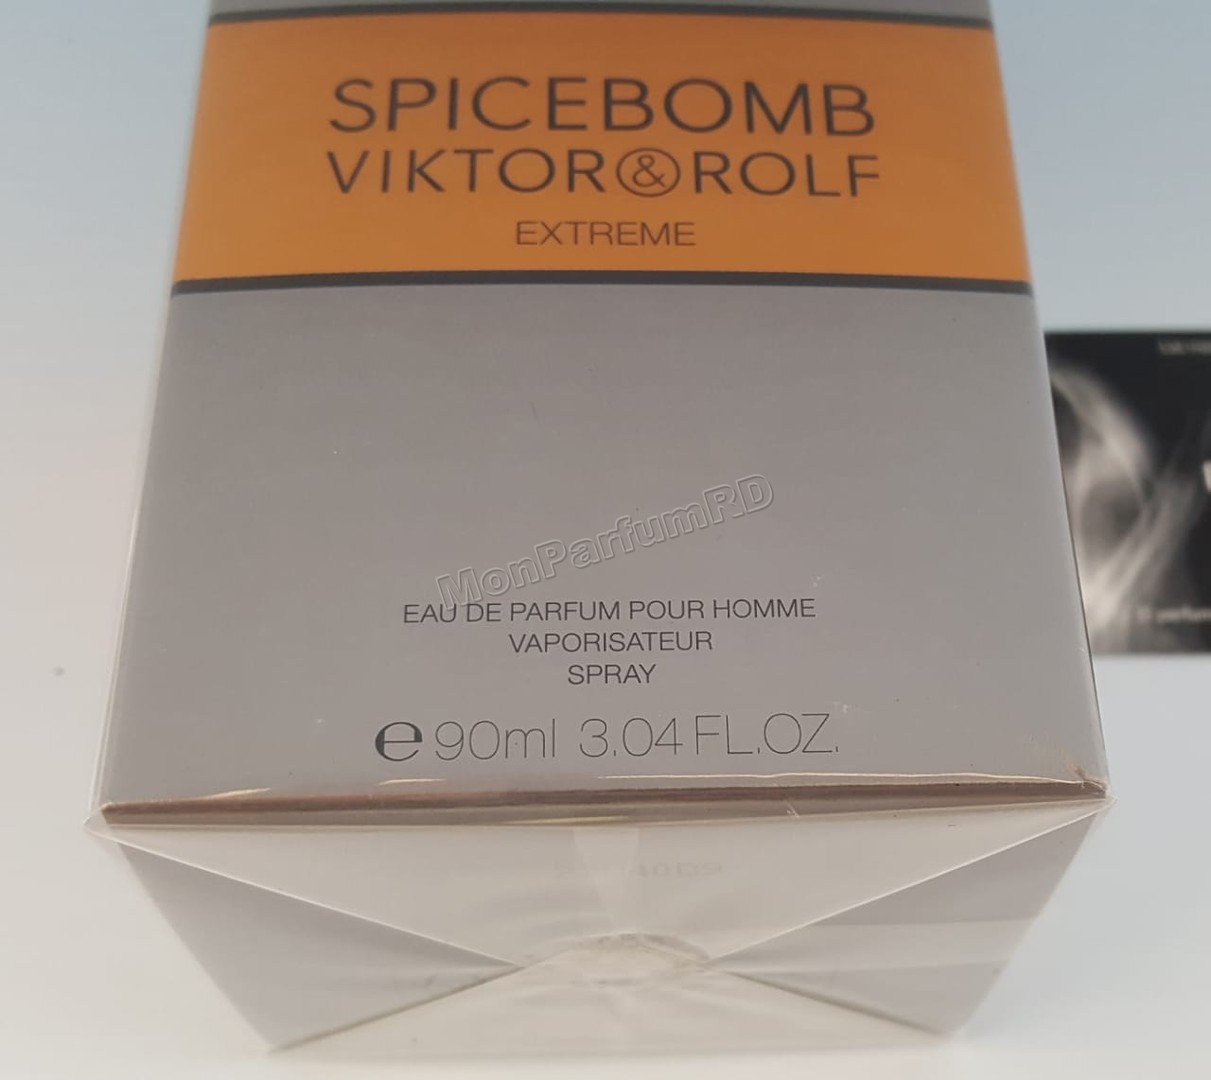 salud y belleza - Perfume Spicebomb Extreme by Viktor & Rolf 2